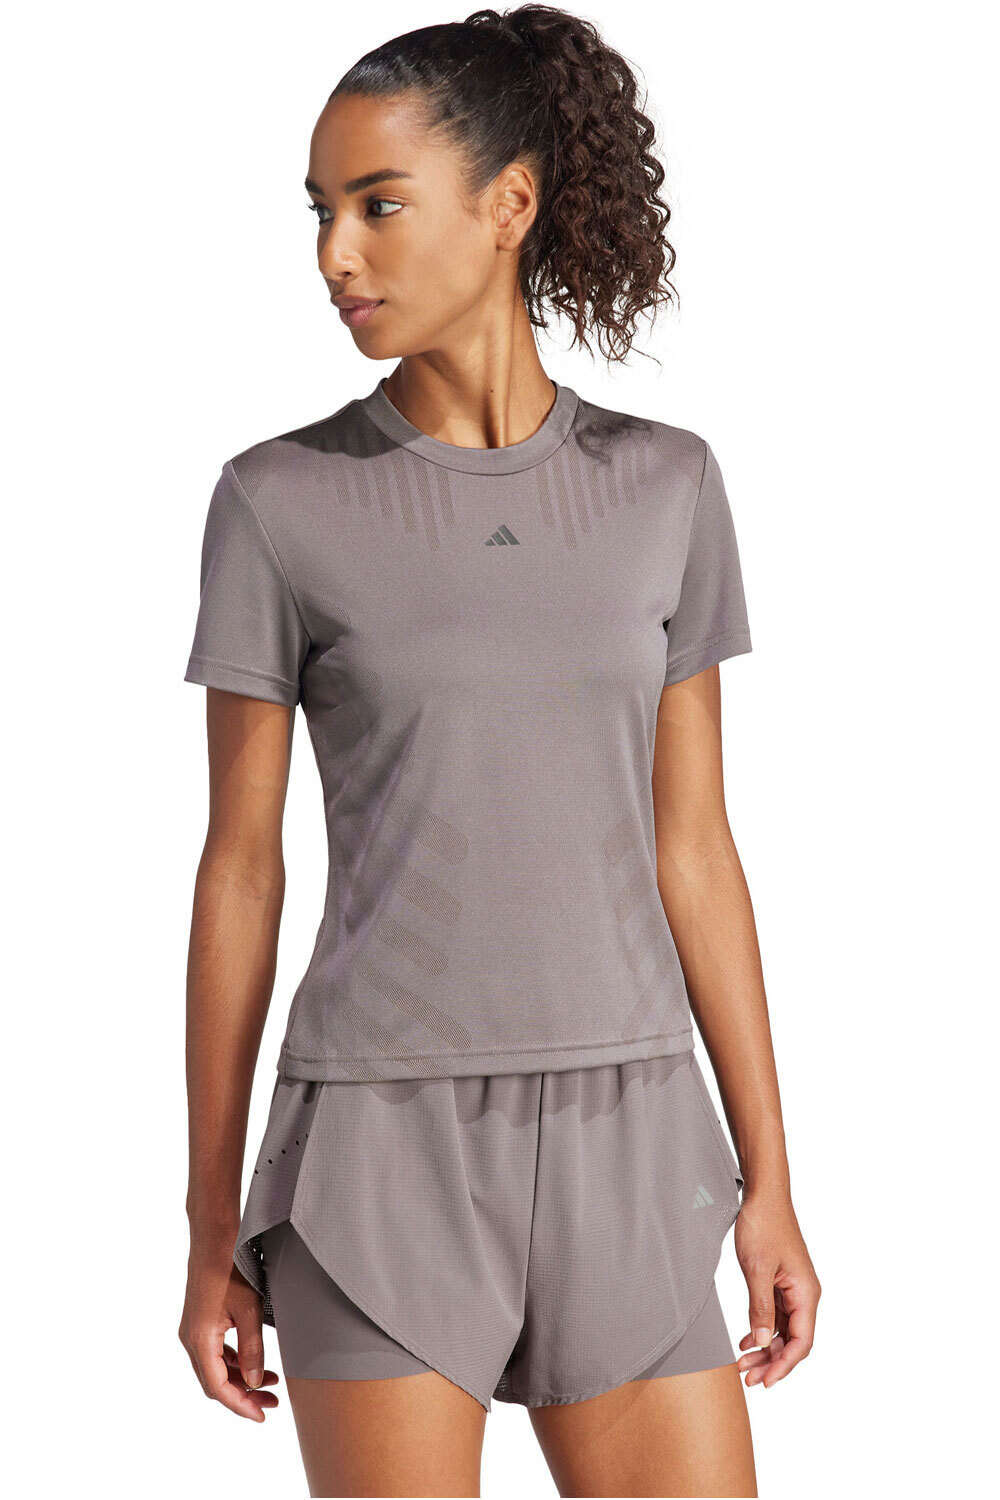 adidas camisetas fitness mujer HR HIIT AIRCH T vista frontal